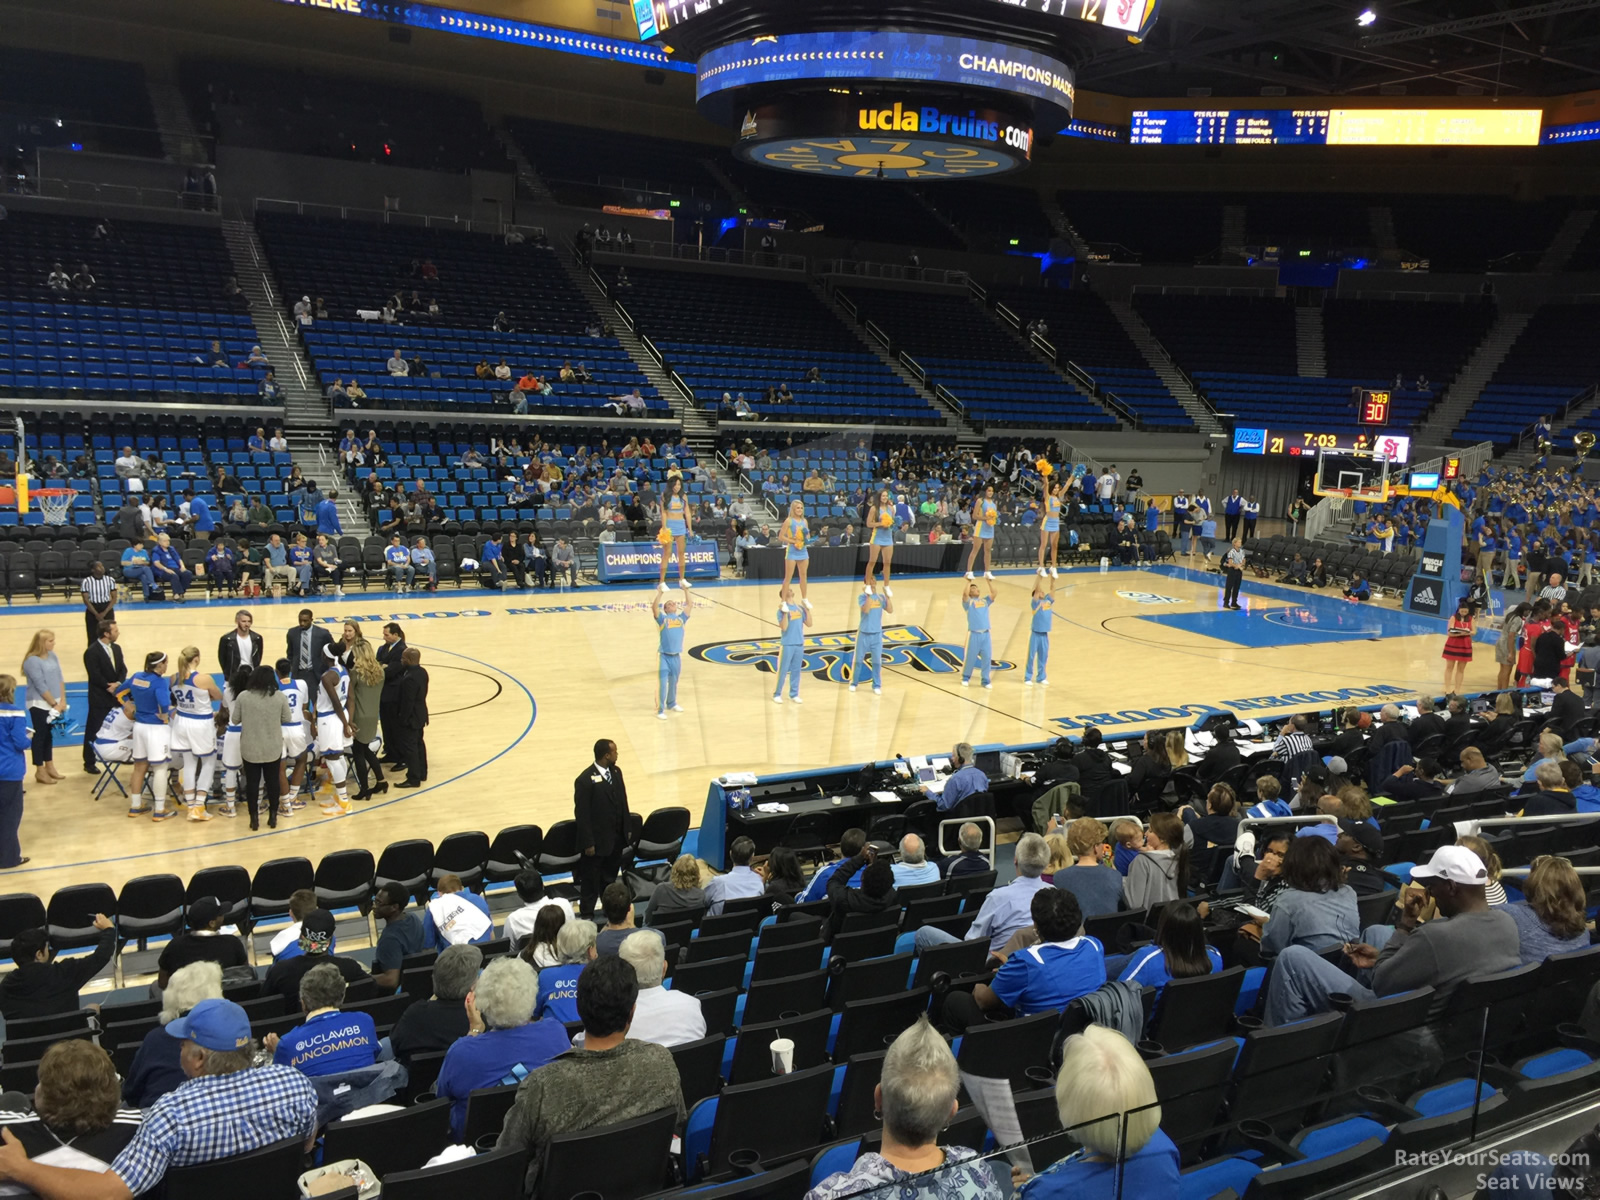 section 103, row 3 seat view  - pauley pavilion